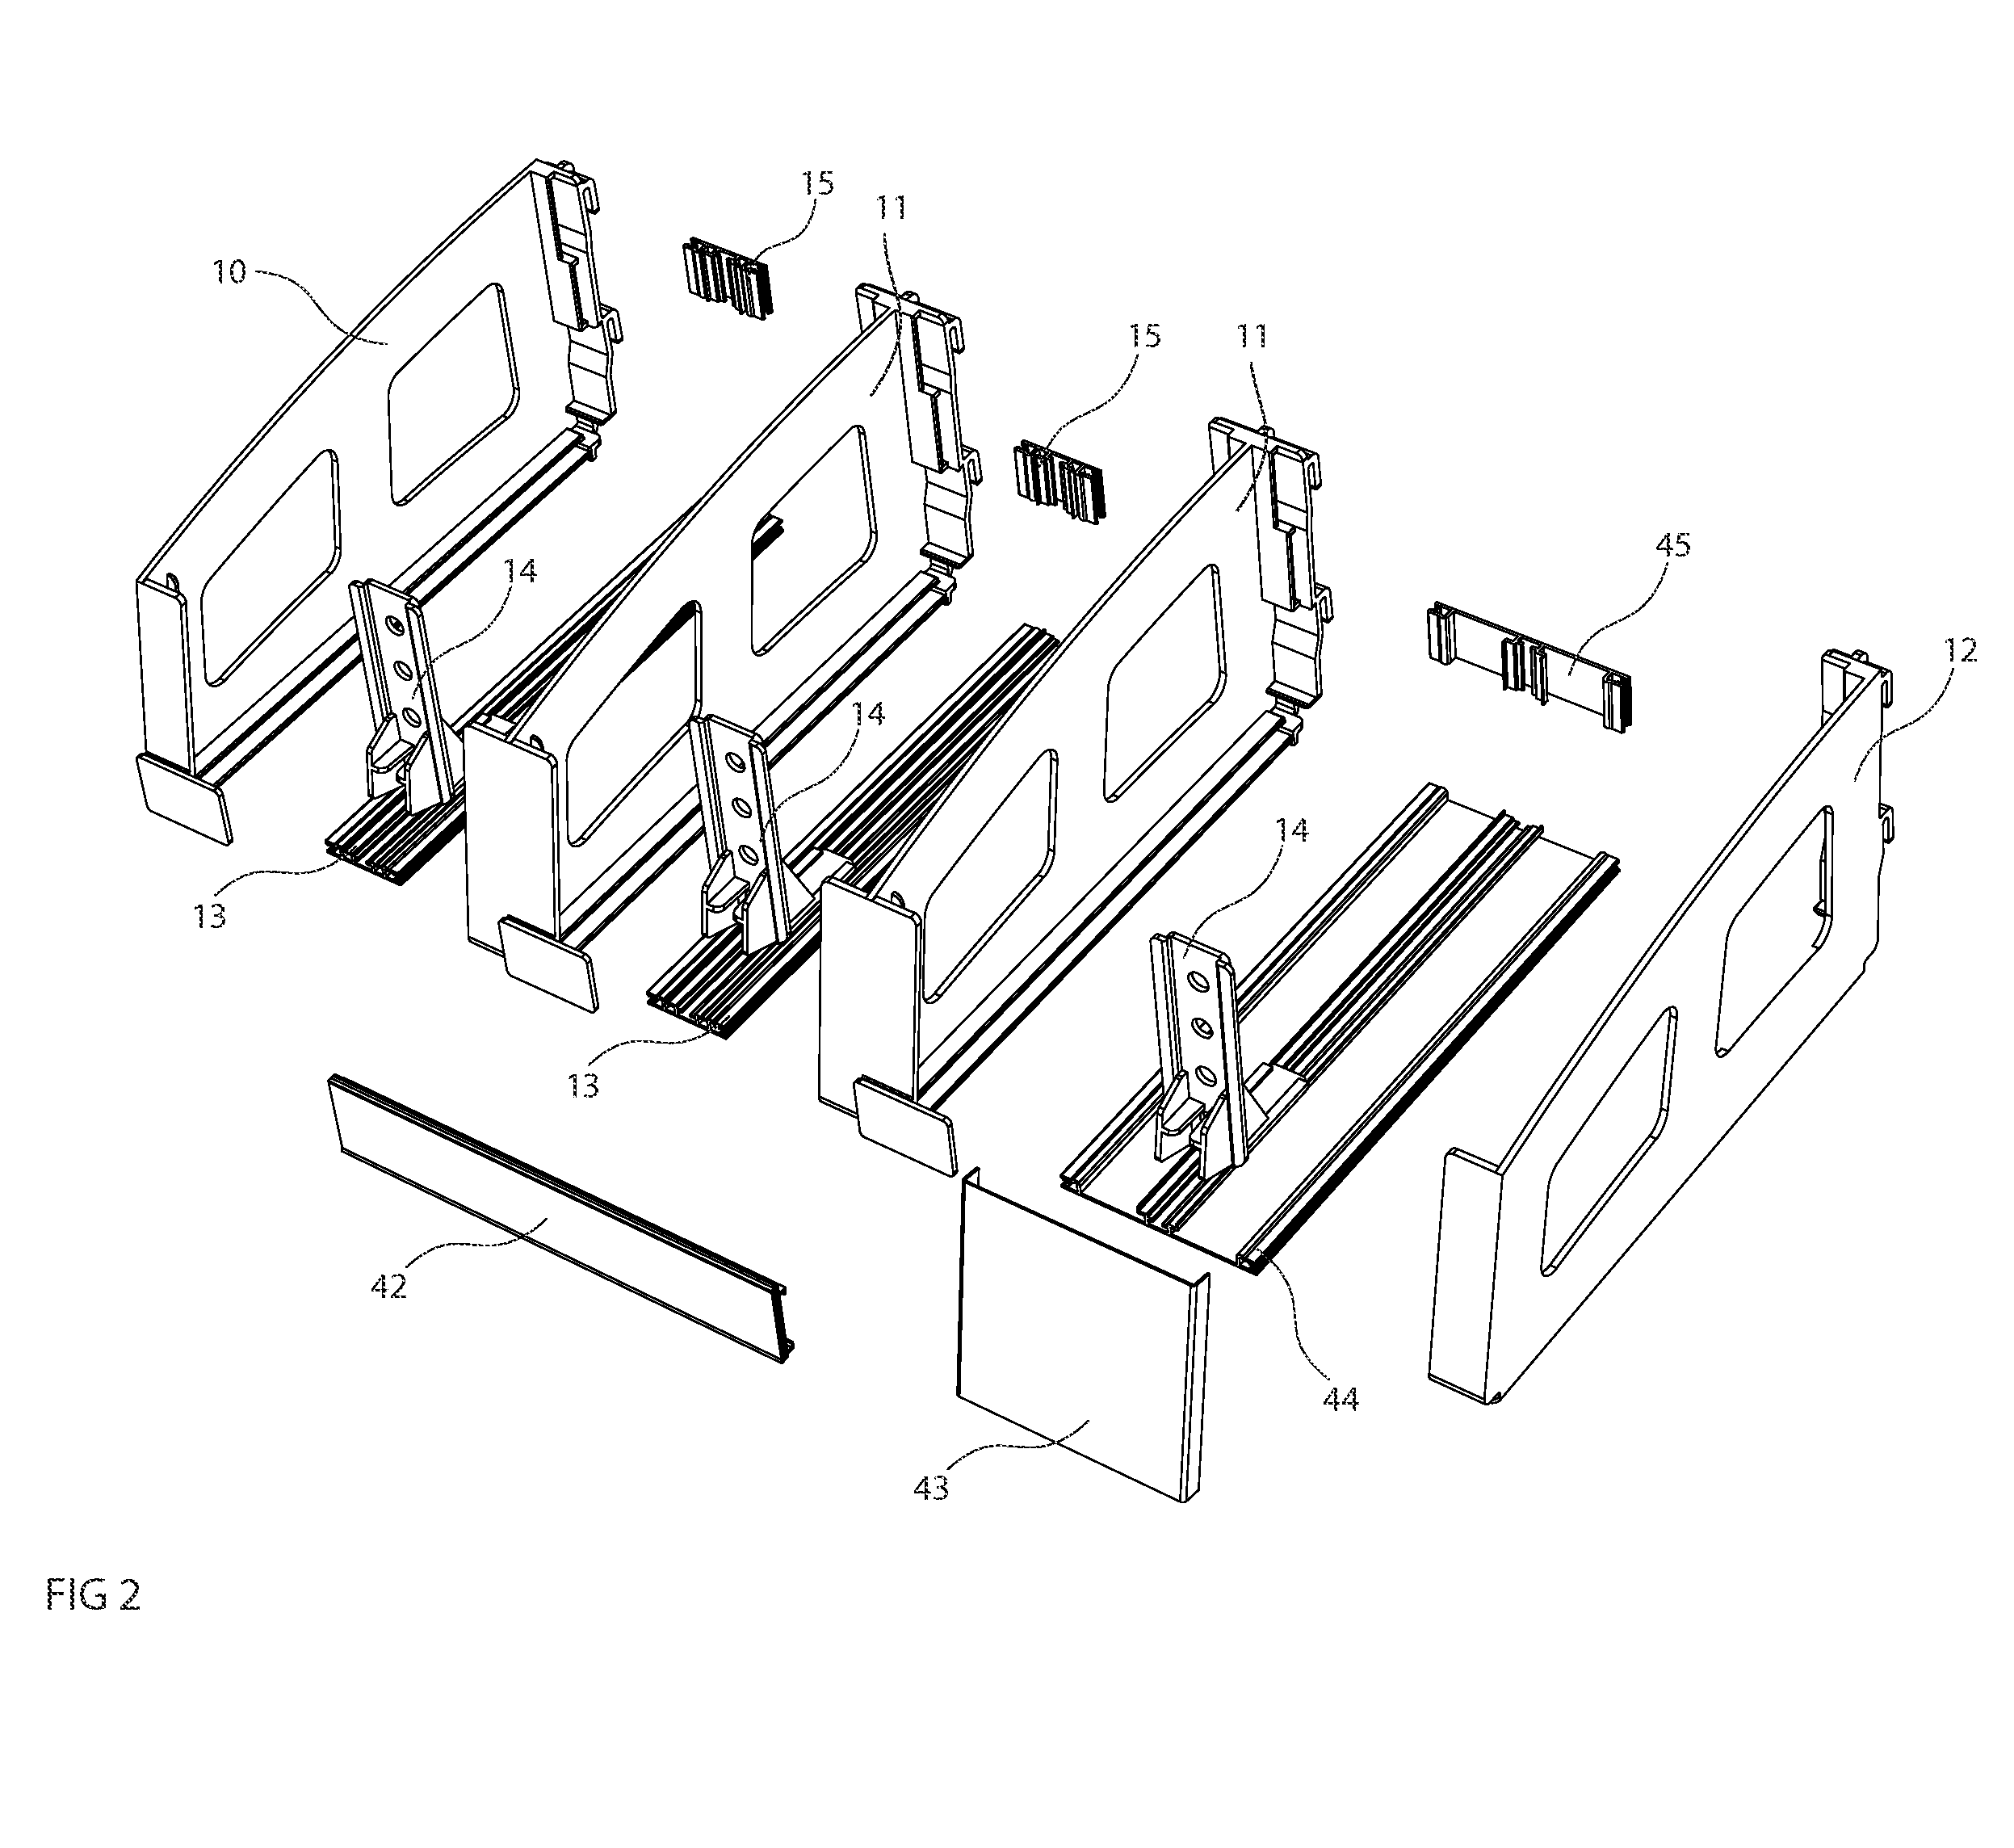 Hanging product divider and pusher systems and methods for dividing, pushing and/or dispensing one or more retail products